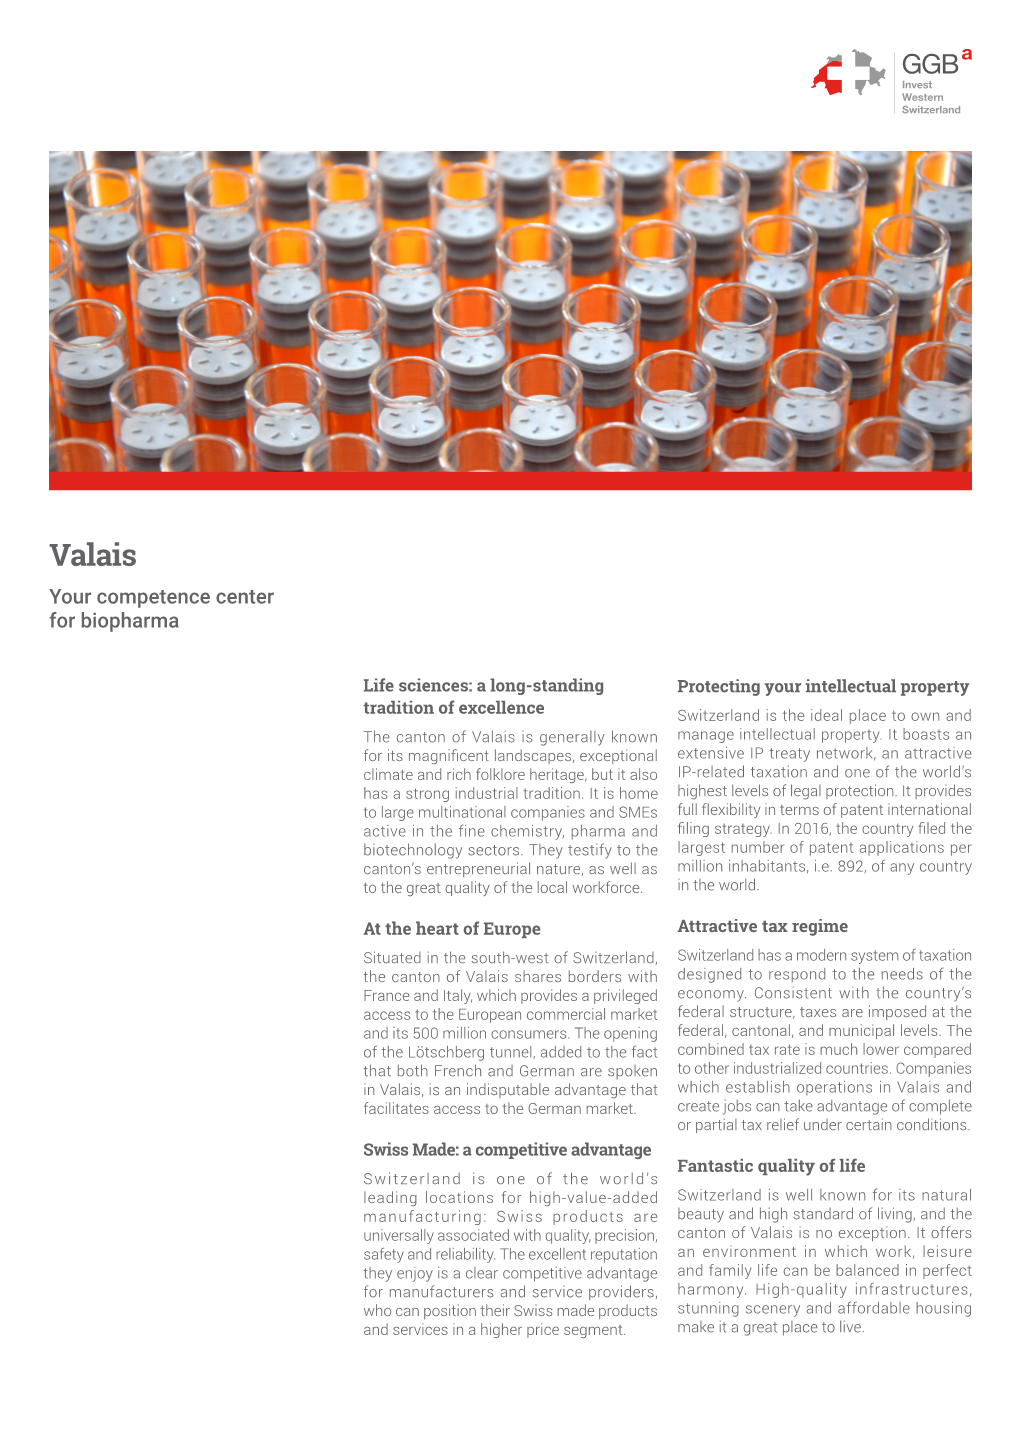 Valais – Your Competence Center for Biopharma 2